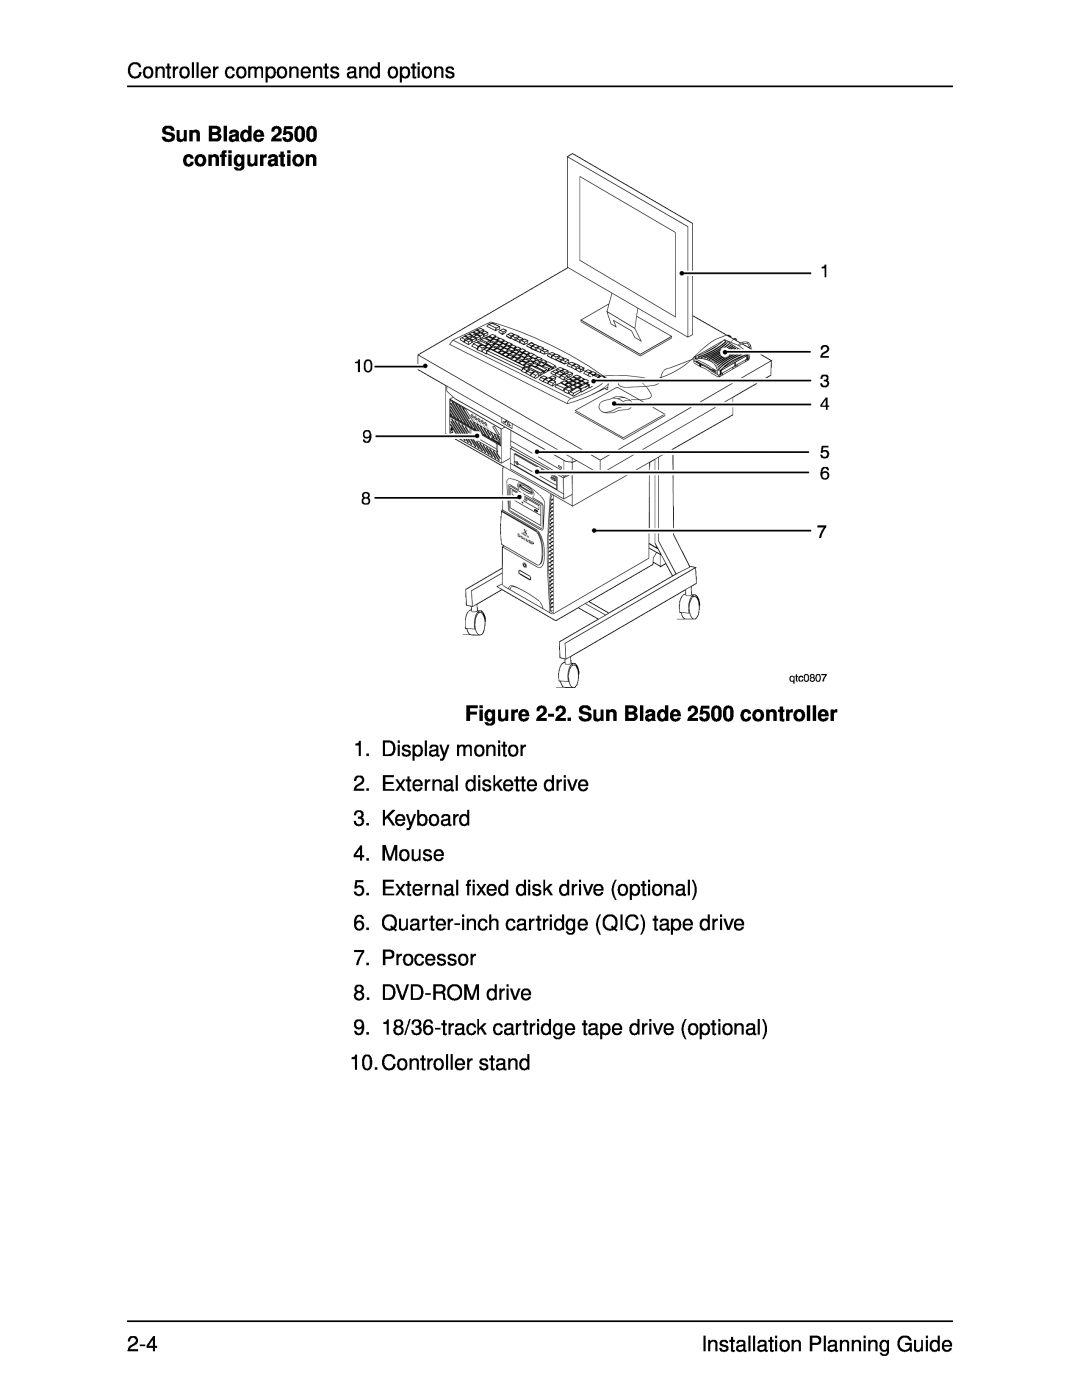 Xerox 100 Controller components and options, Sun Blade 2500 configuration -2. Sun Blade 2500 controller, Controller stand 